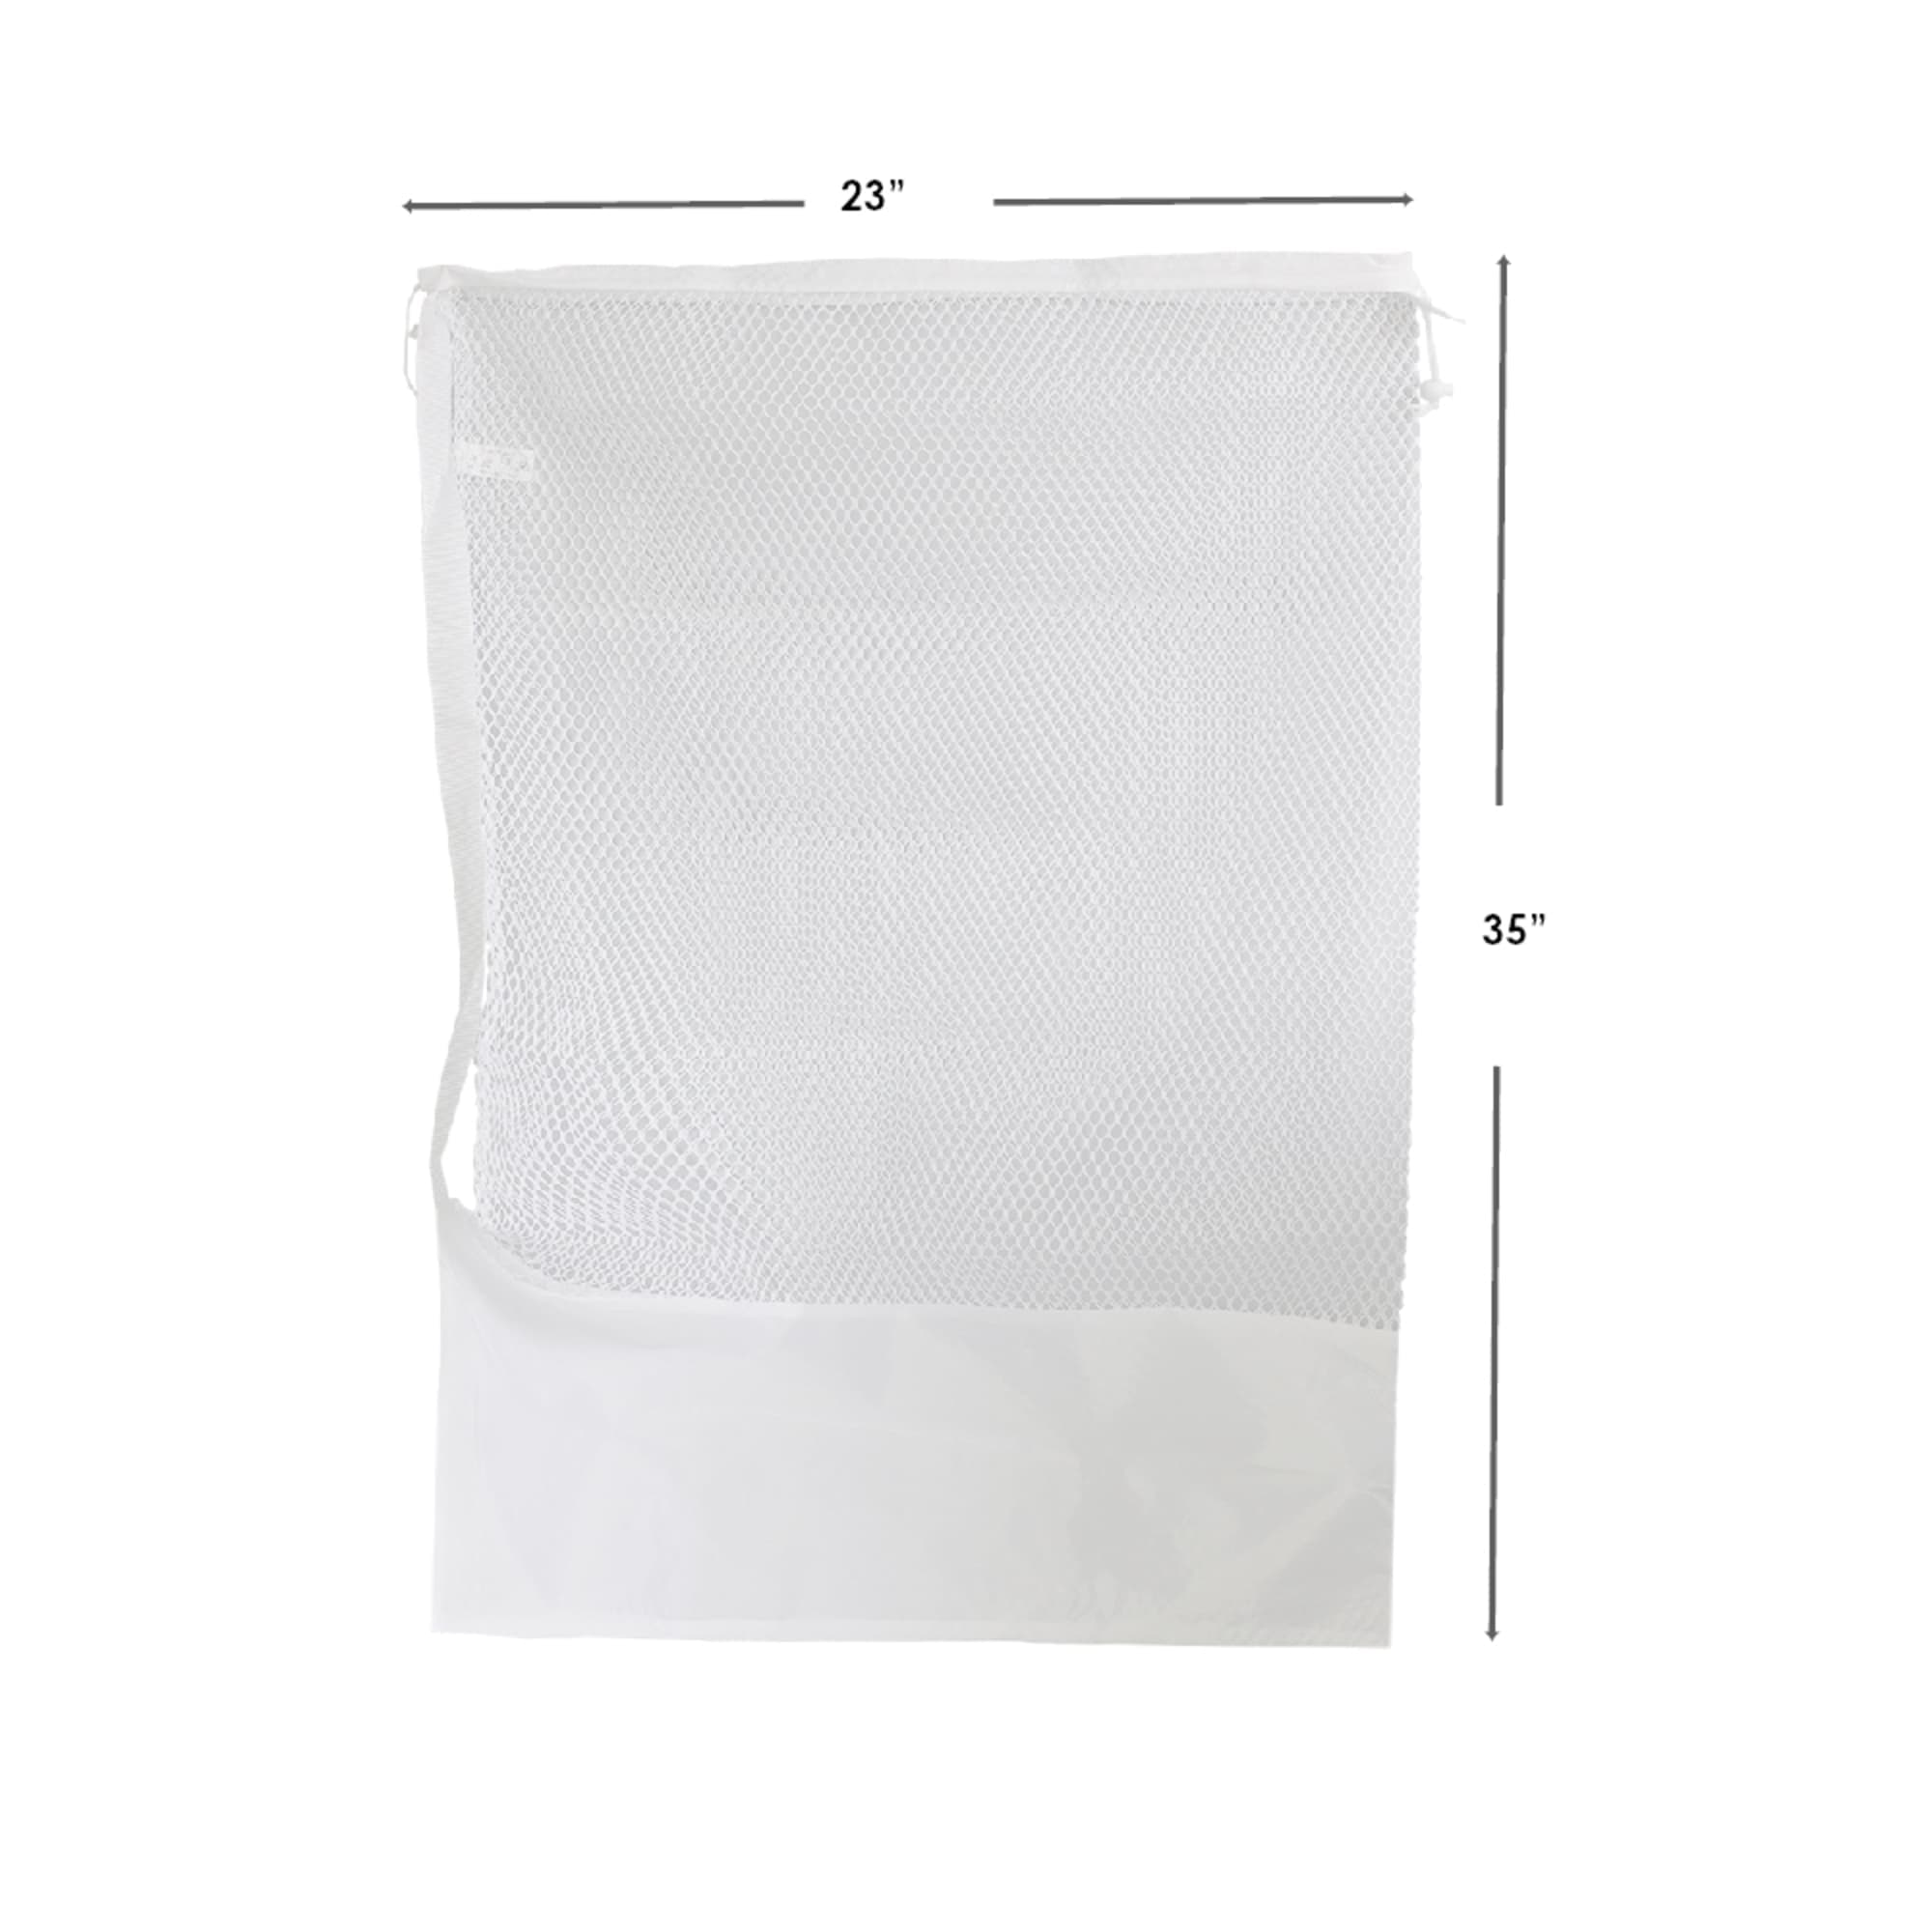 Home Basics Mesh Laundry Bag with Handle $3.00 EACH, CASE PACK OF 24